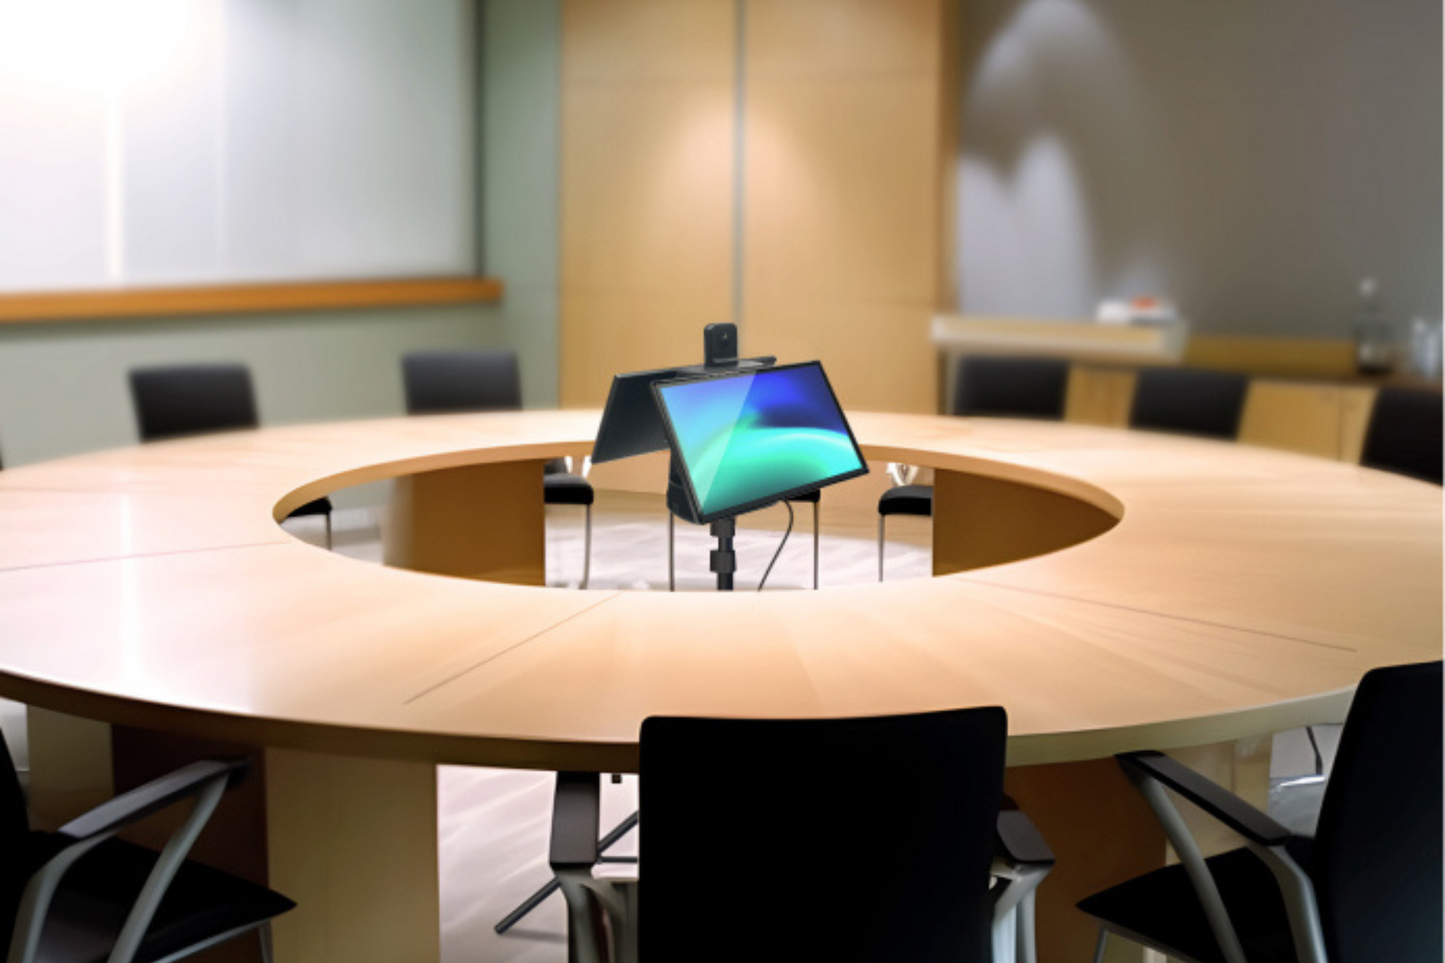 Kandao Meeting Ultra: Setting a New Standard for 360 Video Conferencing